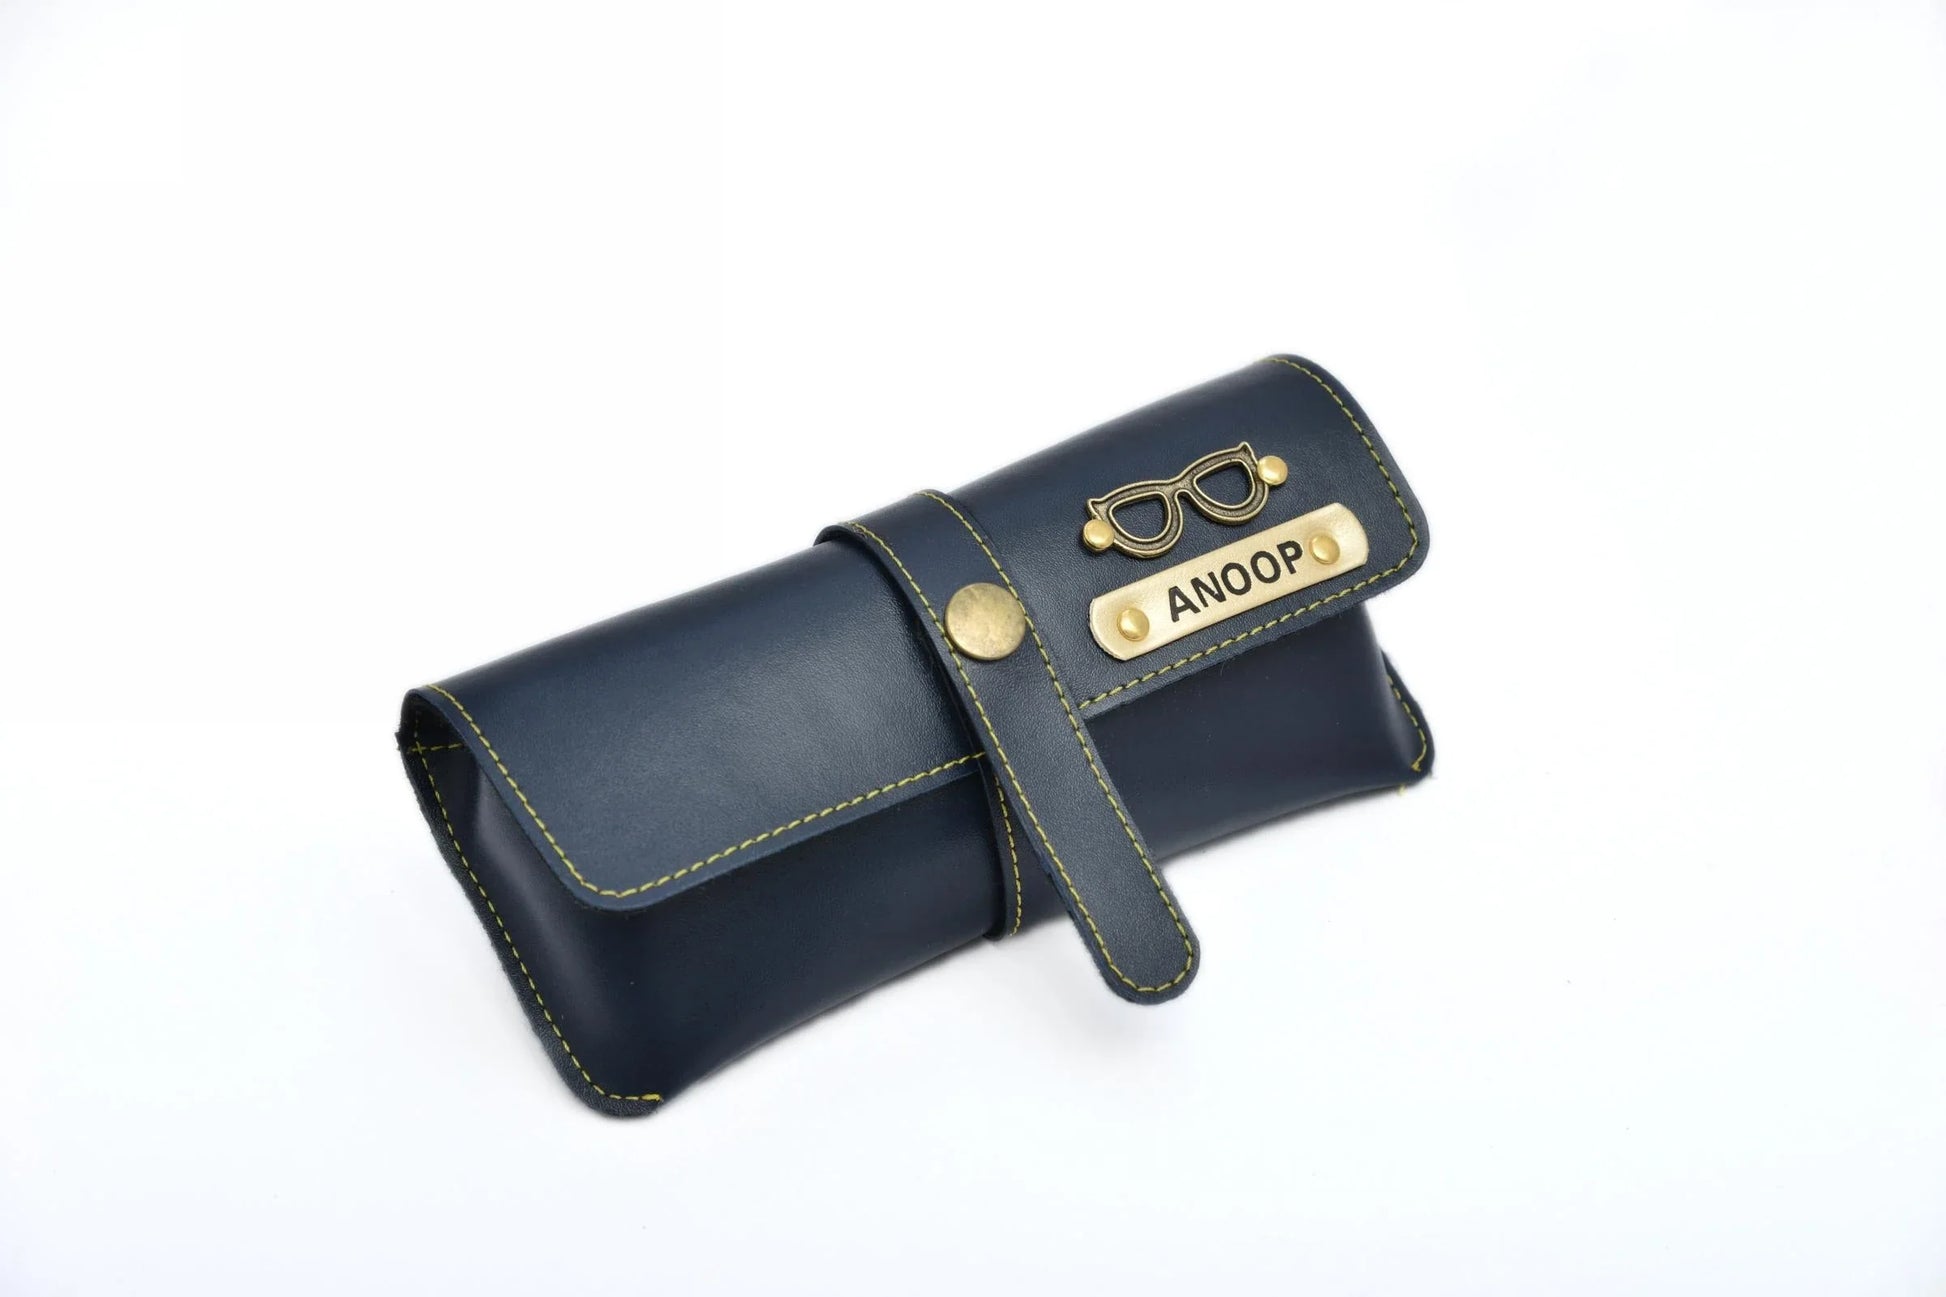 personalized-cb03-royal-blue-customized-best-gift-for-boyfriend-girlfriend.So, protect your eyewear too and make it look modern by getting your very own classy, personalized unisex leather glass case.  Add your name and charm to your favourite coloured eyewear case and live in style!   With a royal leathery finish and a top-notch material quality, these personalized unisex glass cases prove to be sturdy while looking stylish. They protect your eyewear from all sorts of stresses!